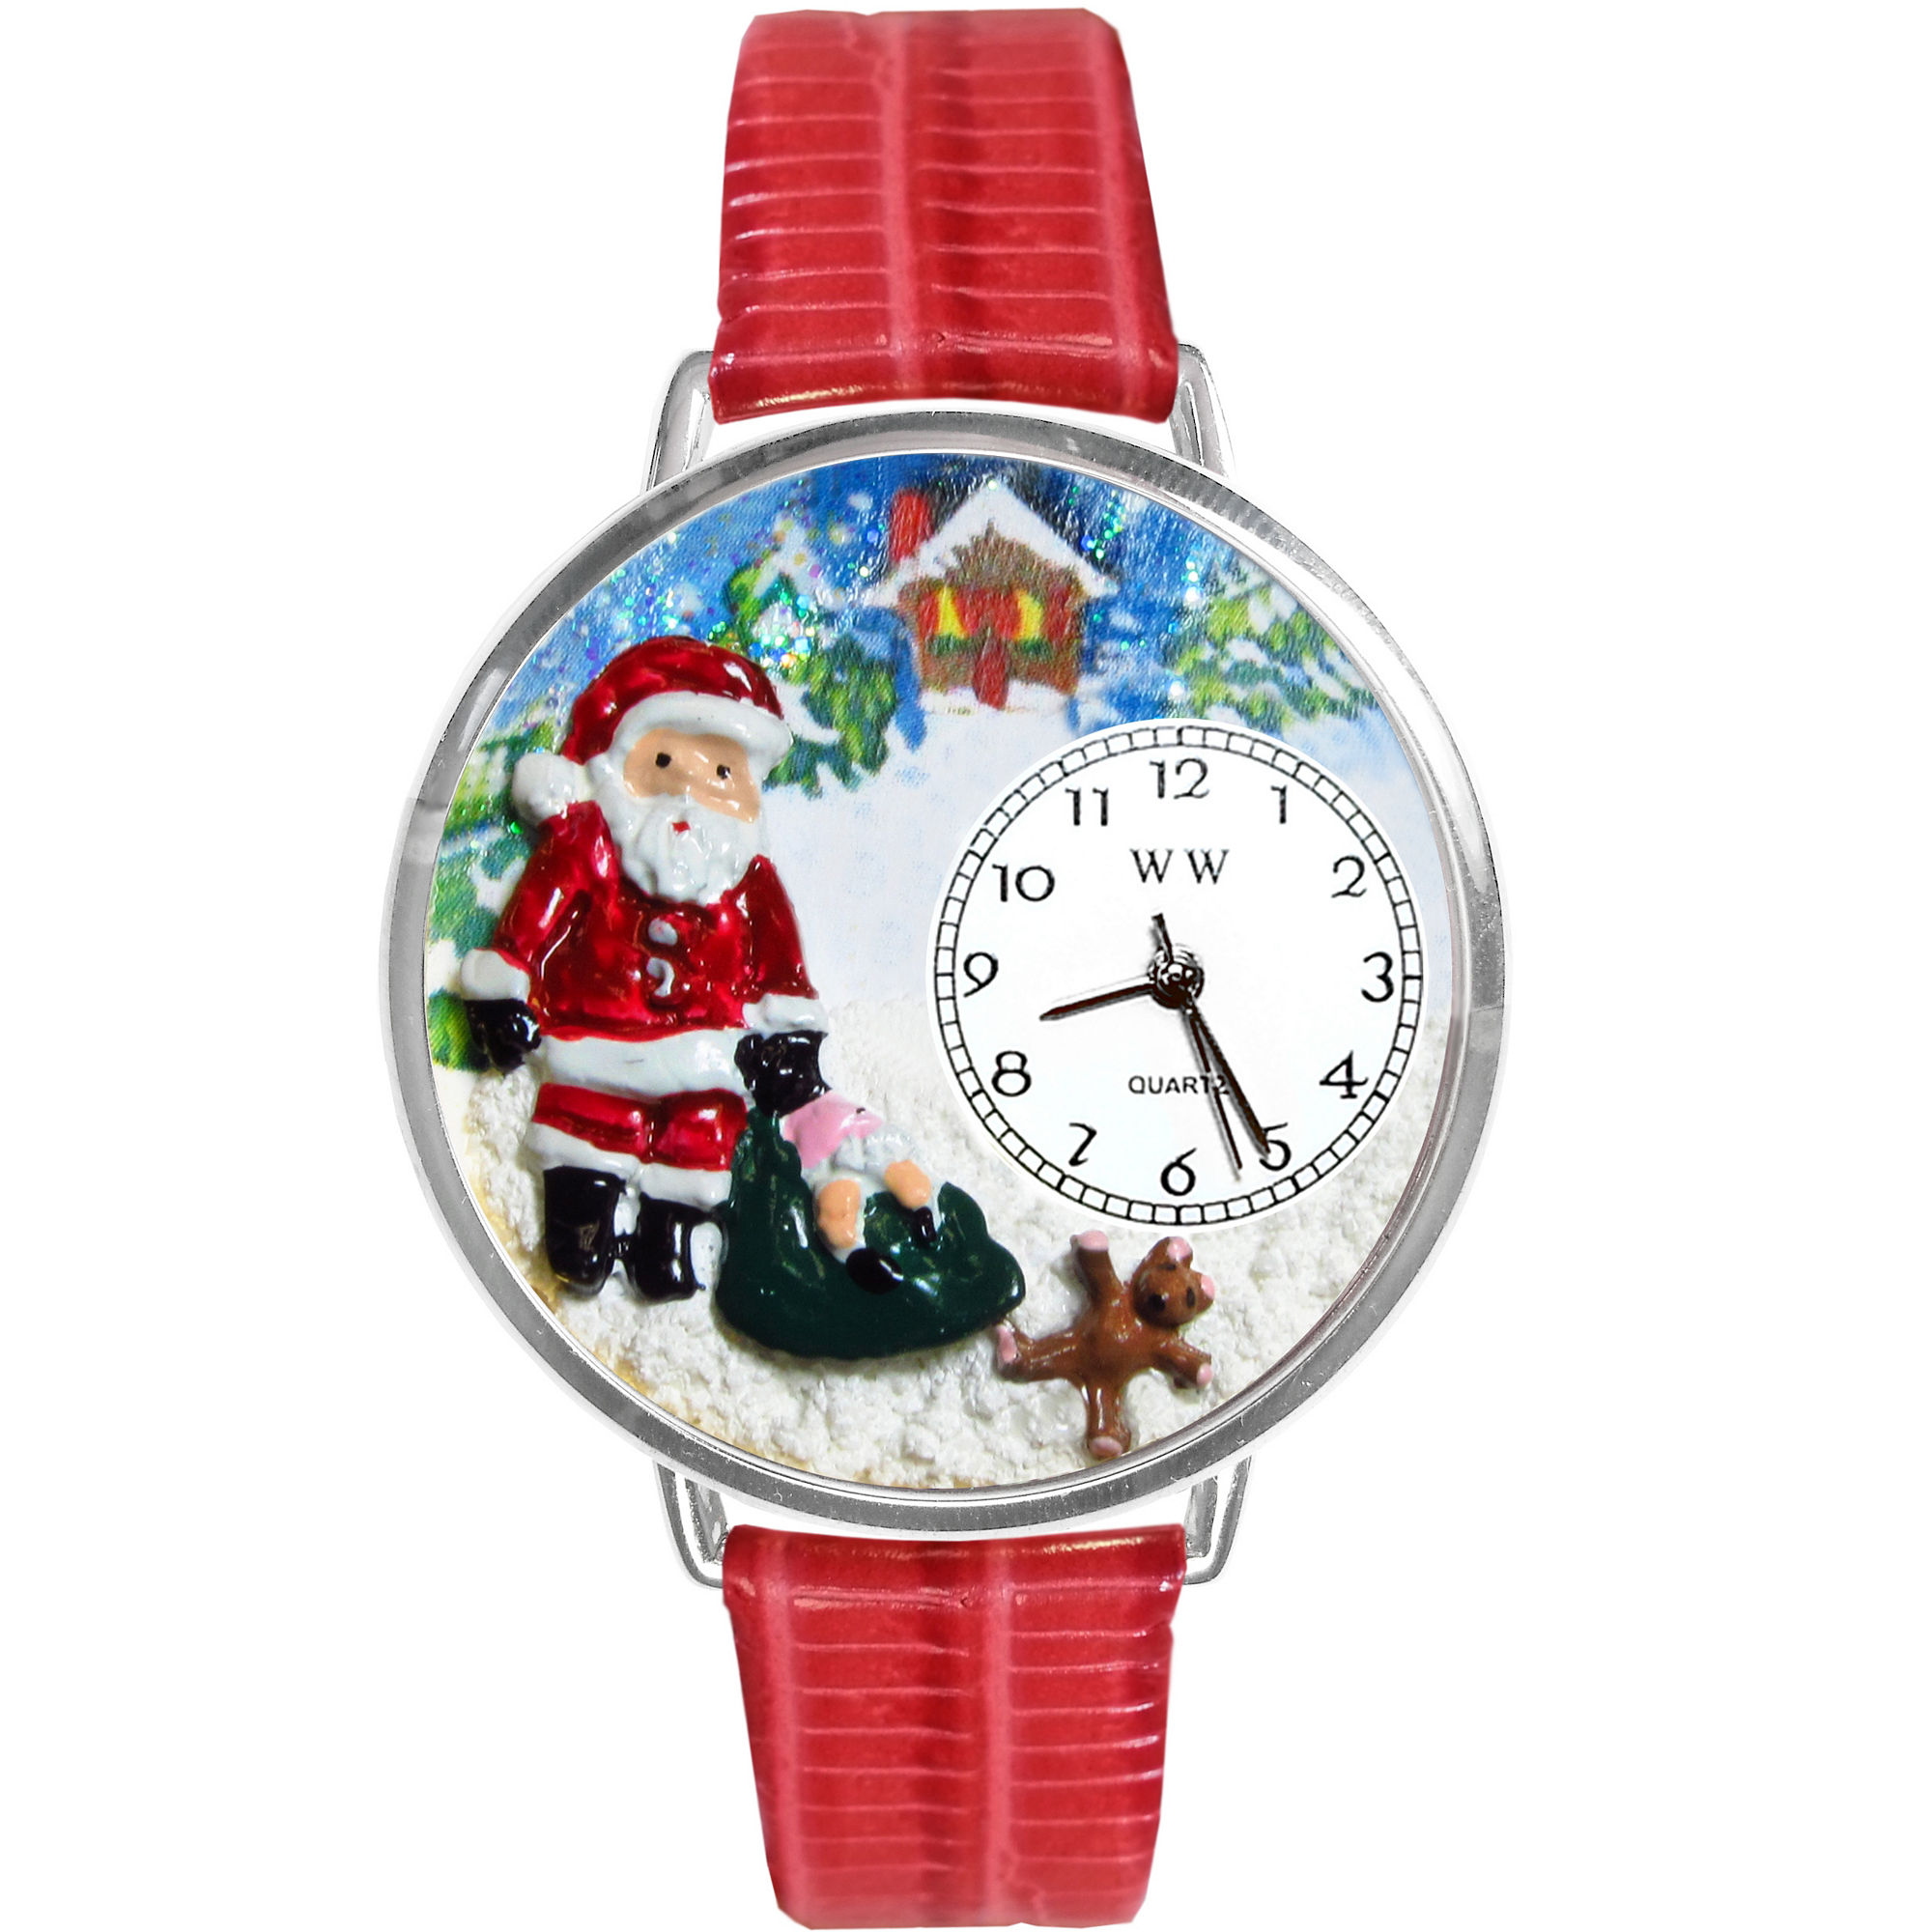 Whimsical Watches Personalized Christmas Santa Claus Womens Silver-Tone Bezel Red Leather Strap Watch